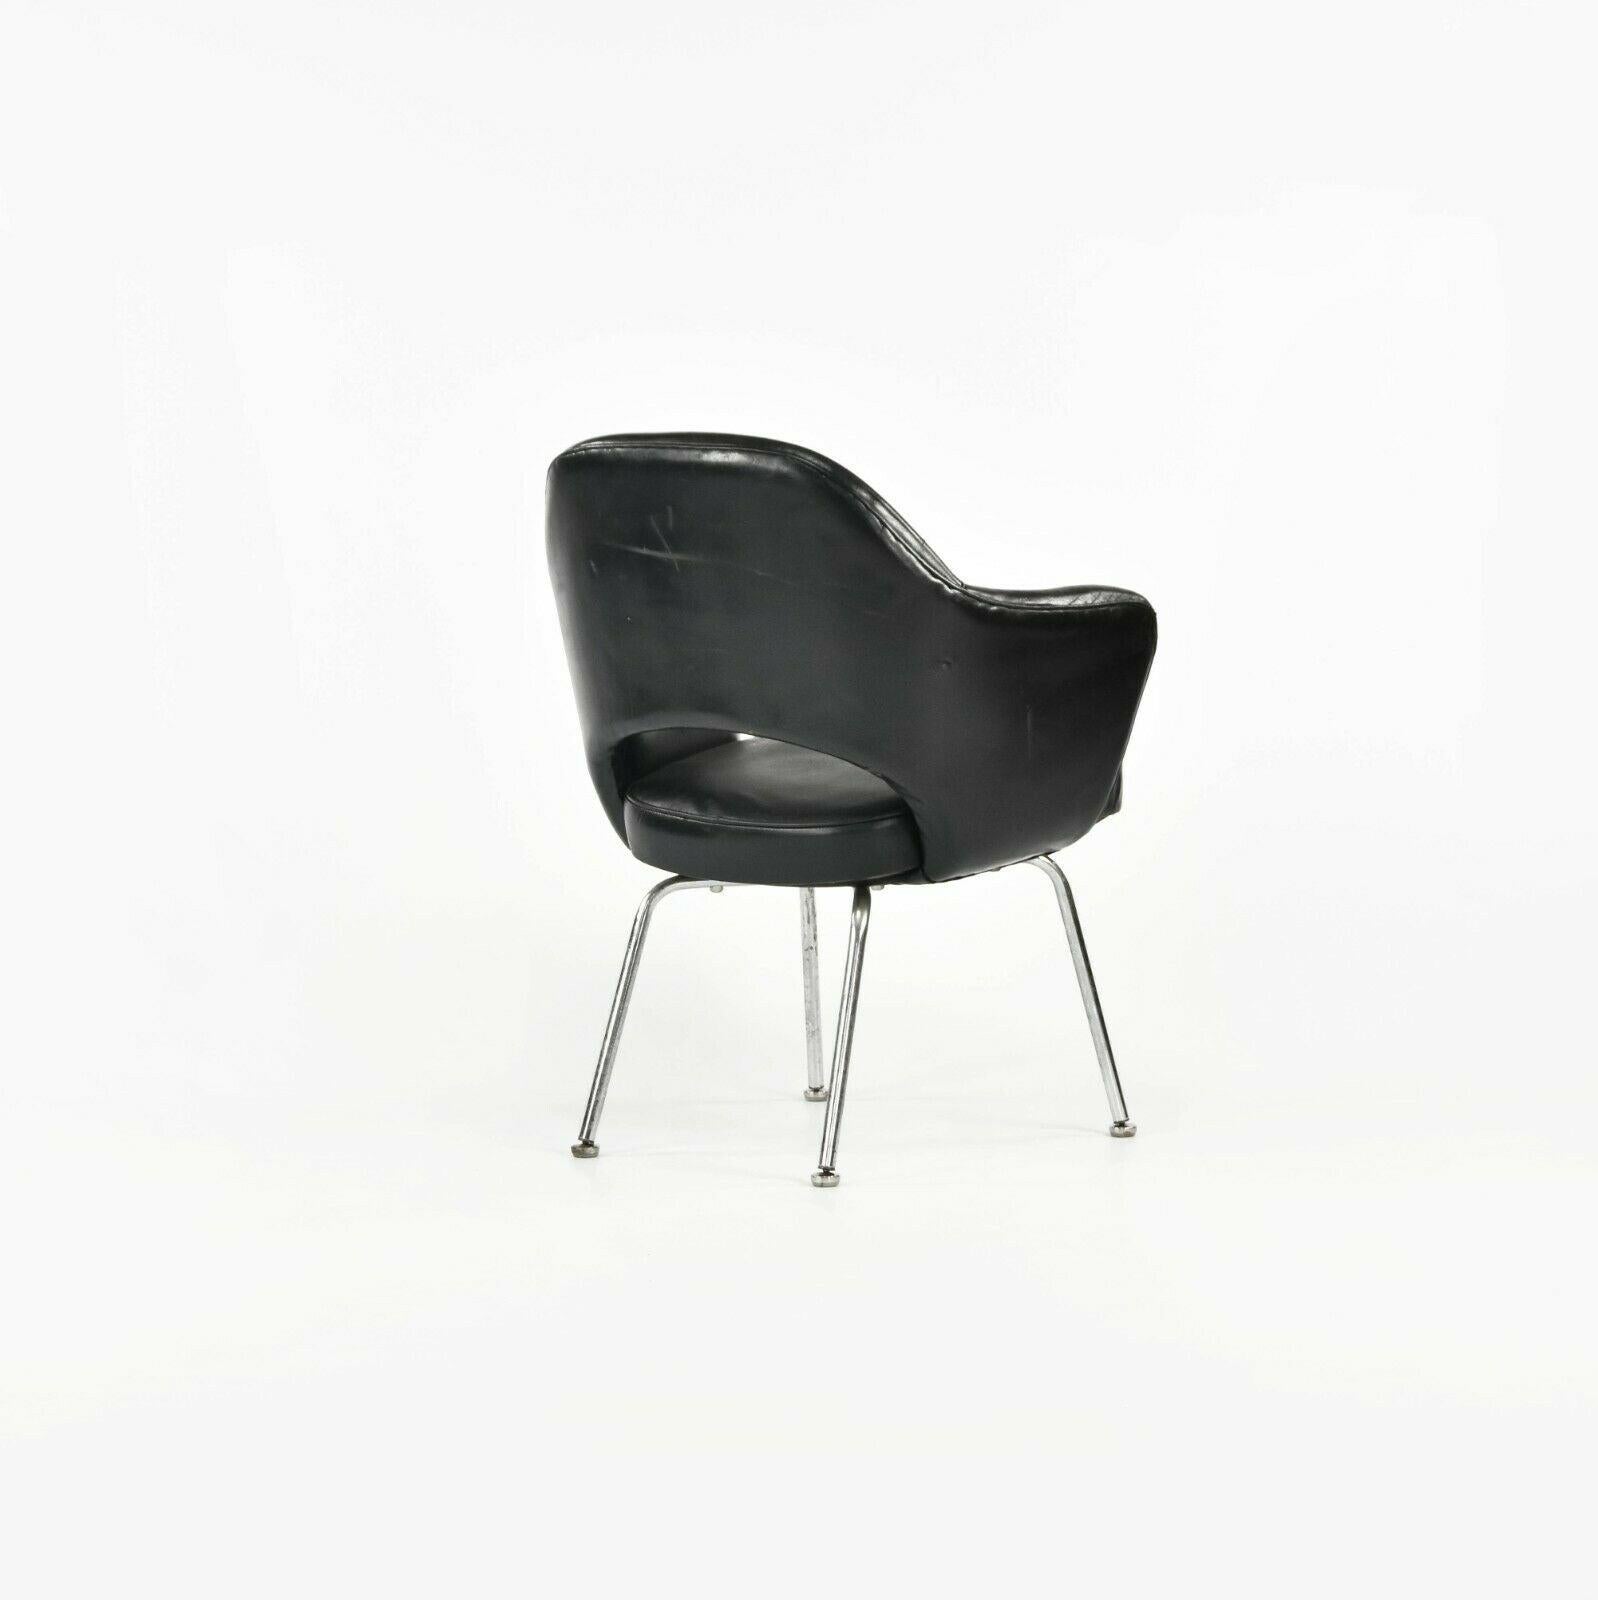 American 1960s Eero Saarinen for Knoll Executive Dining Arm Chair in Black Leather For Sale